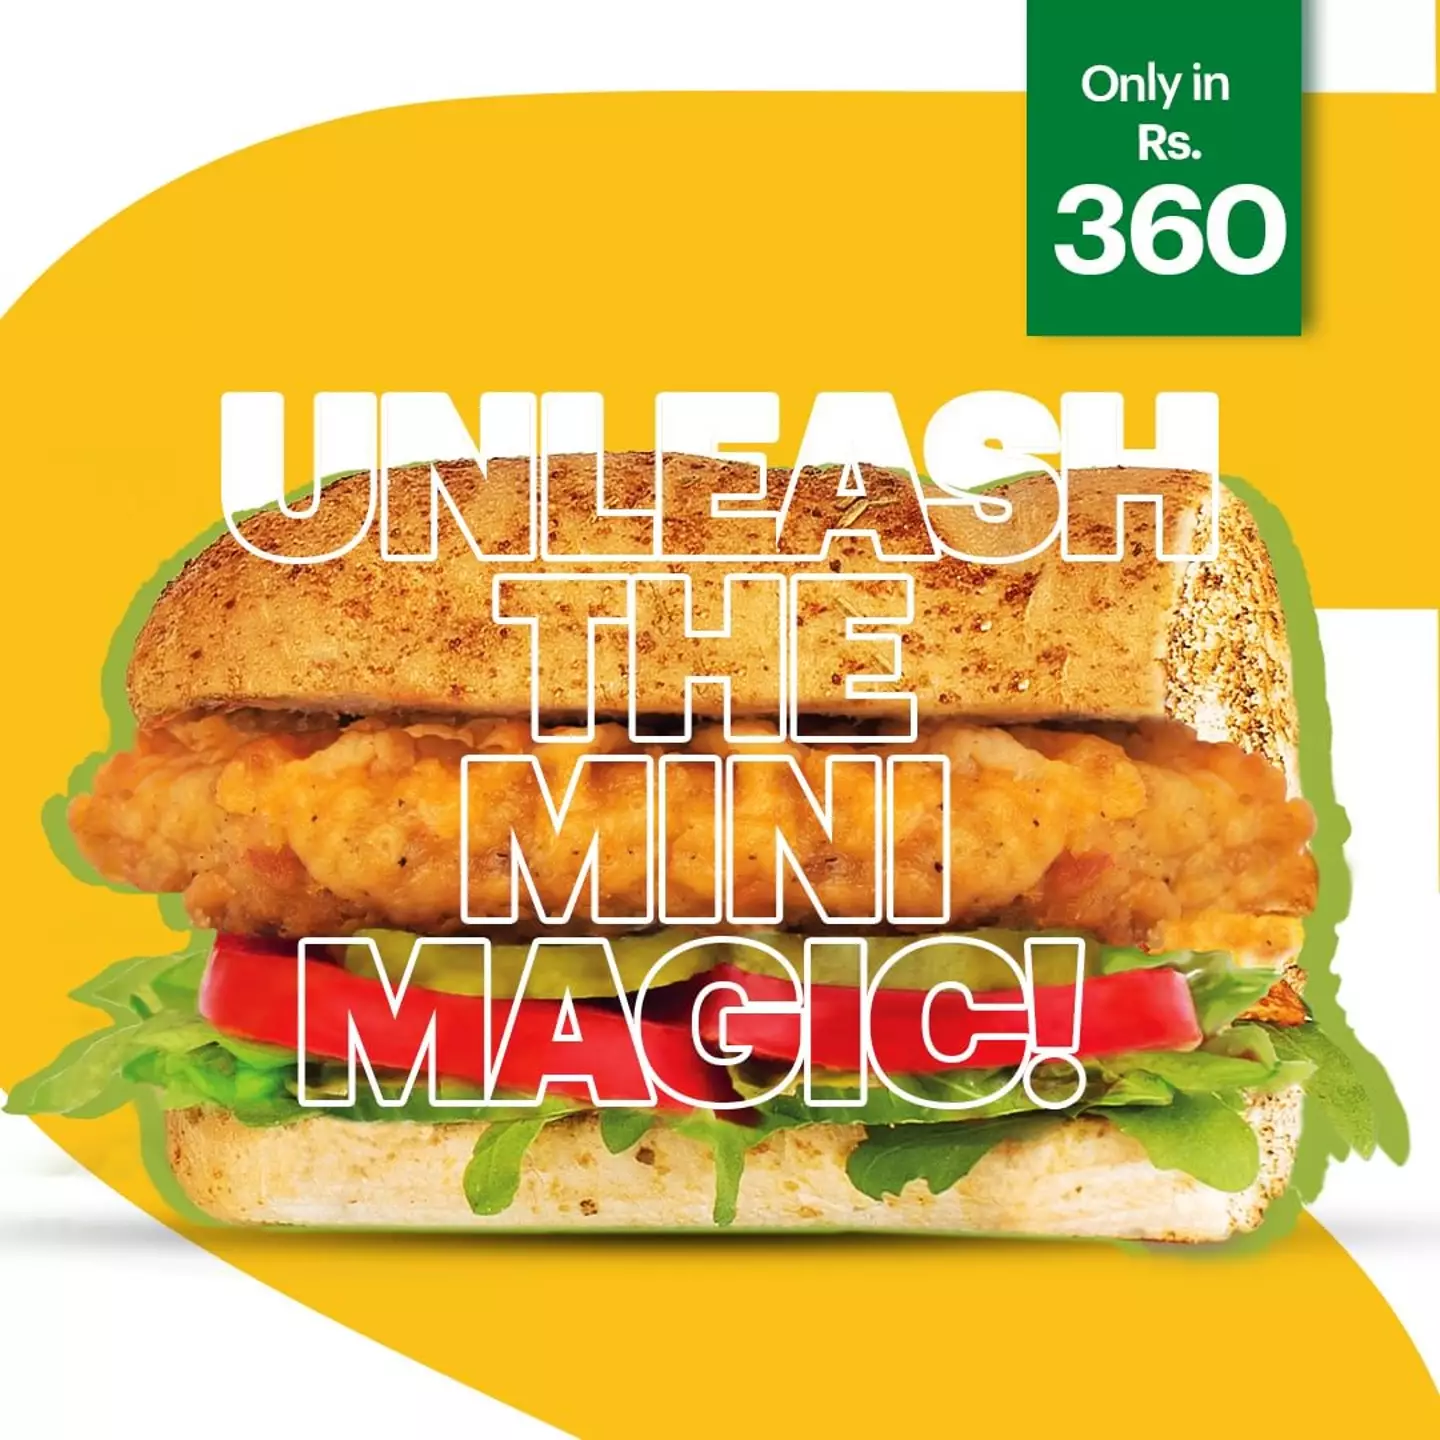 The 'mini sub' was launched last month in various Pakistani Subway stores to combat inflation.